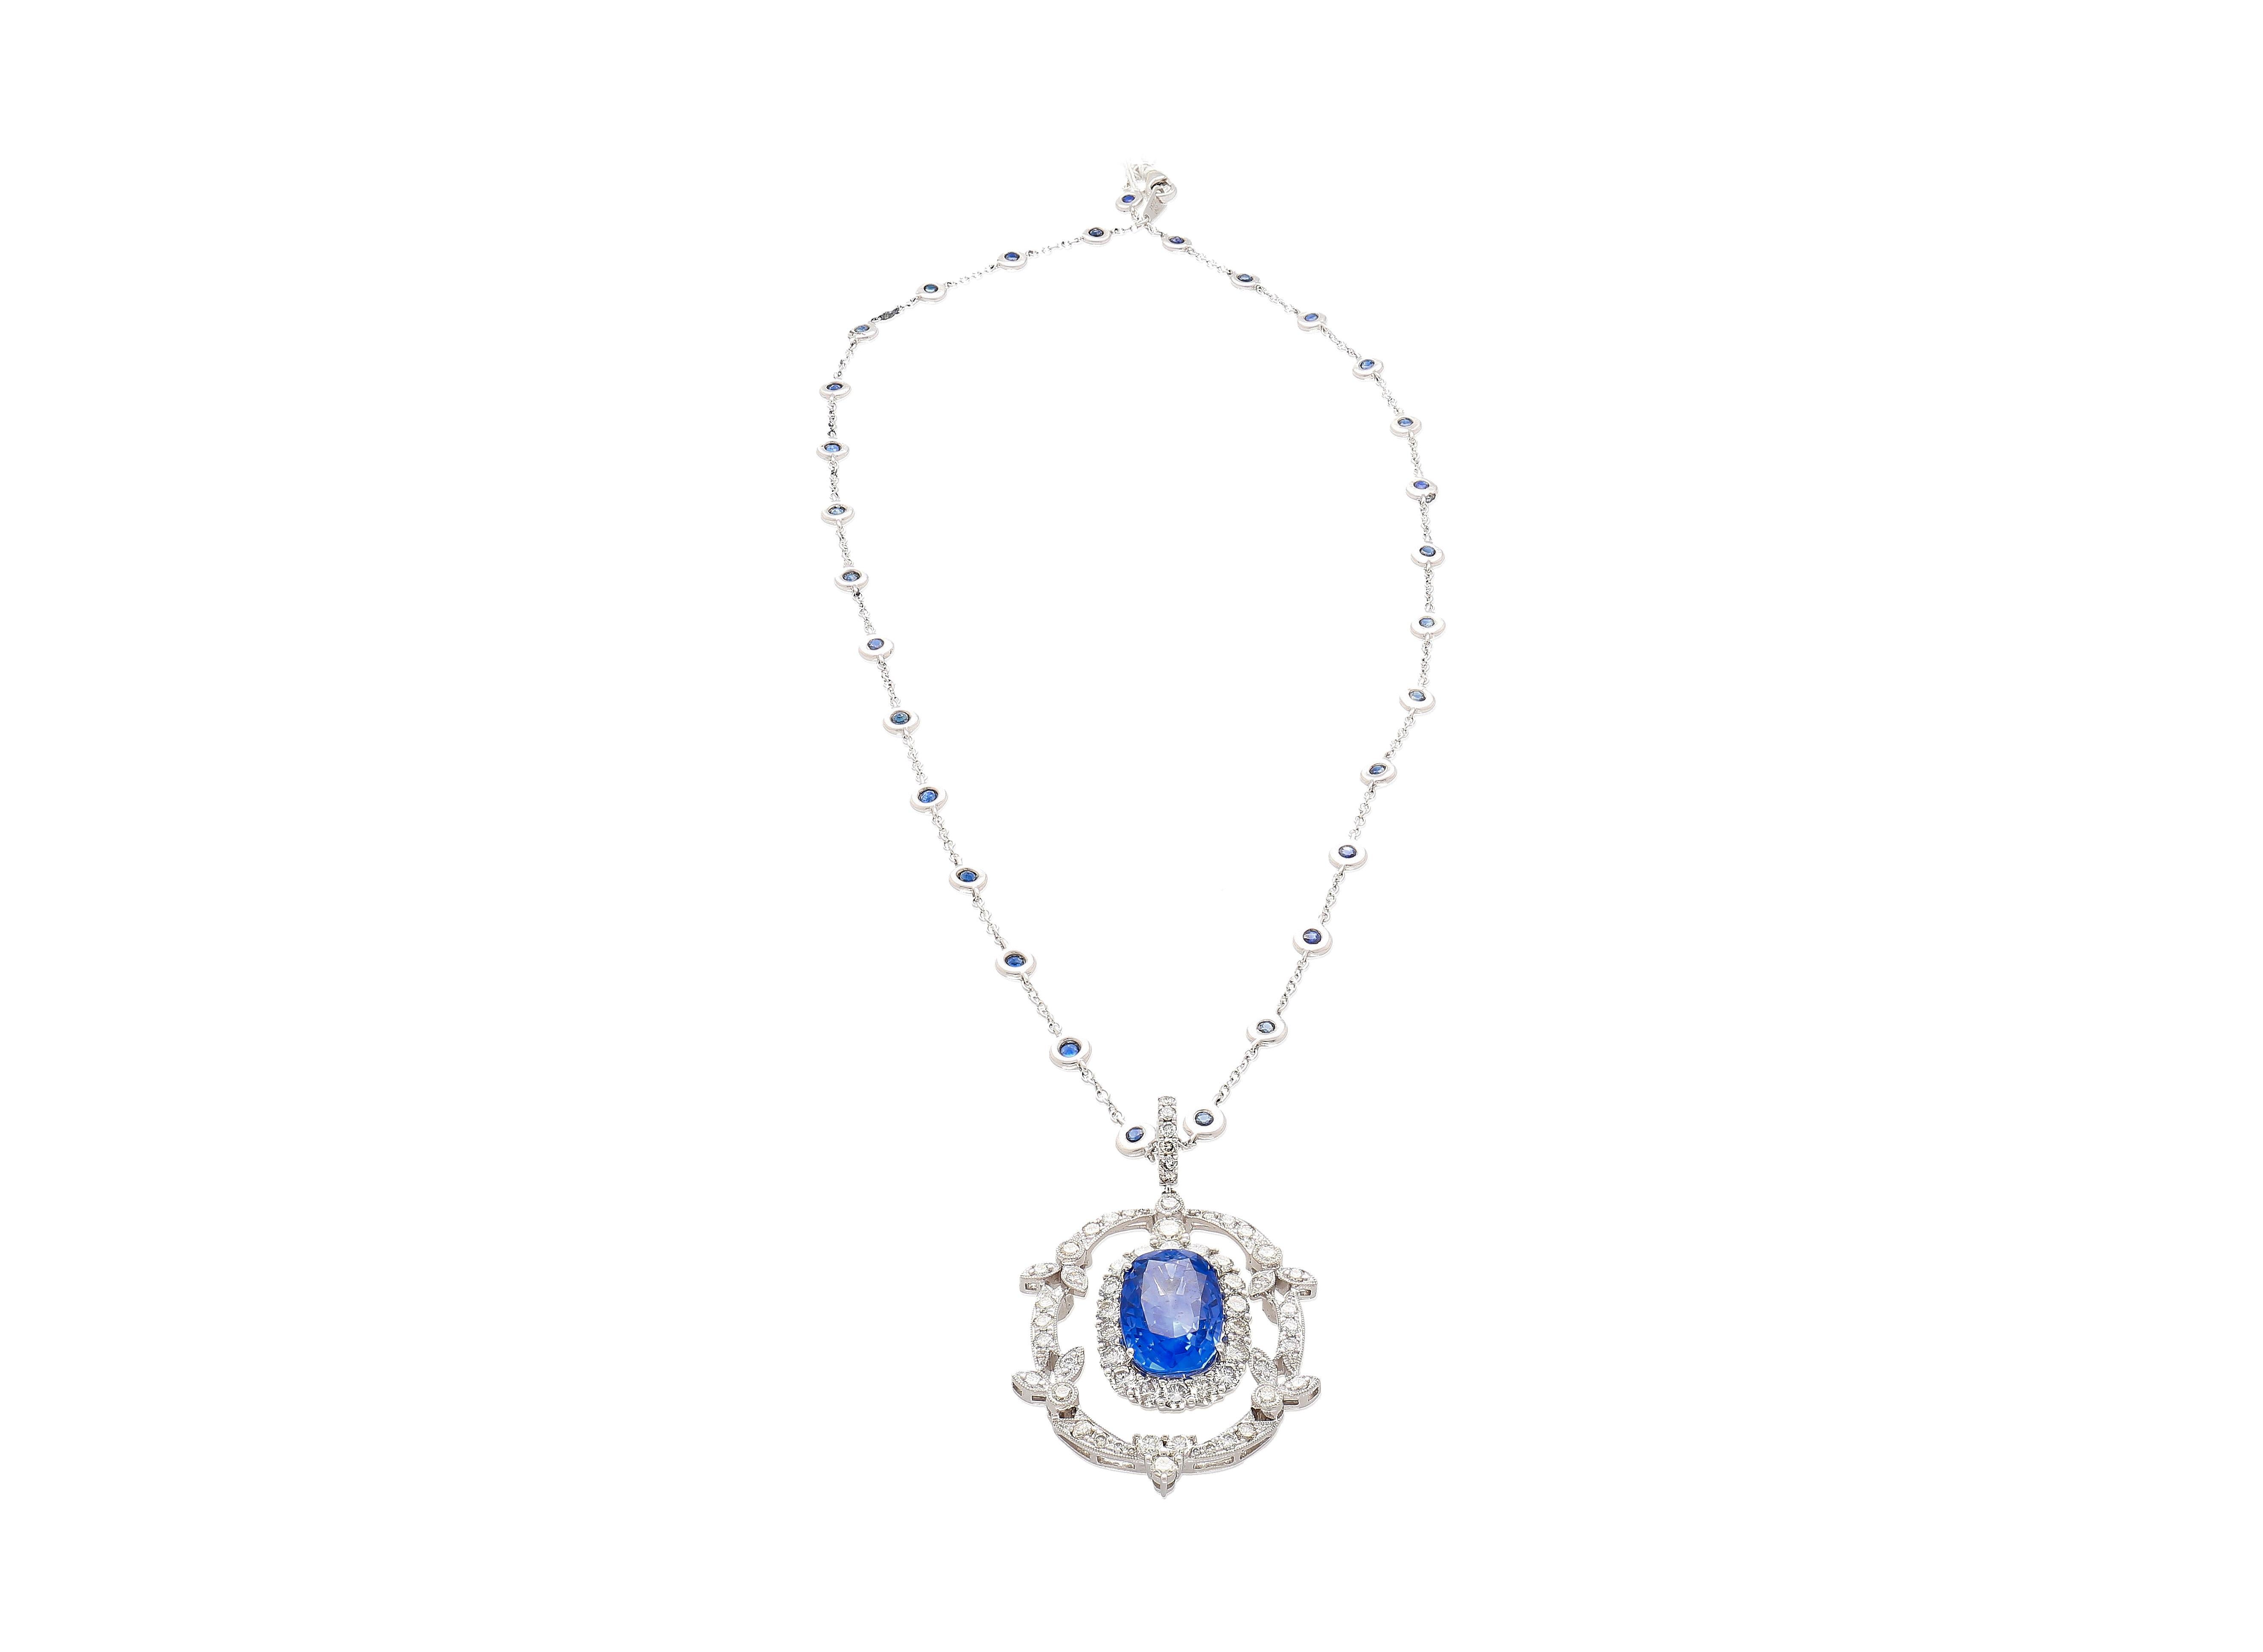 Vintage Victorian-style Blue Sapphire and Diamond pendant necklace in 18K white gold. Featuring a 10.36 carat no heat oval cut Blue Sapphire of Sri Lankan origin. The center stone is a vibrant deep blue saturation with excellent luster and